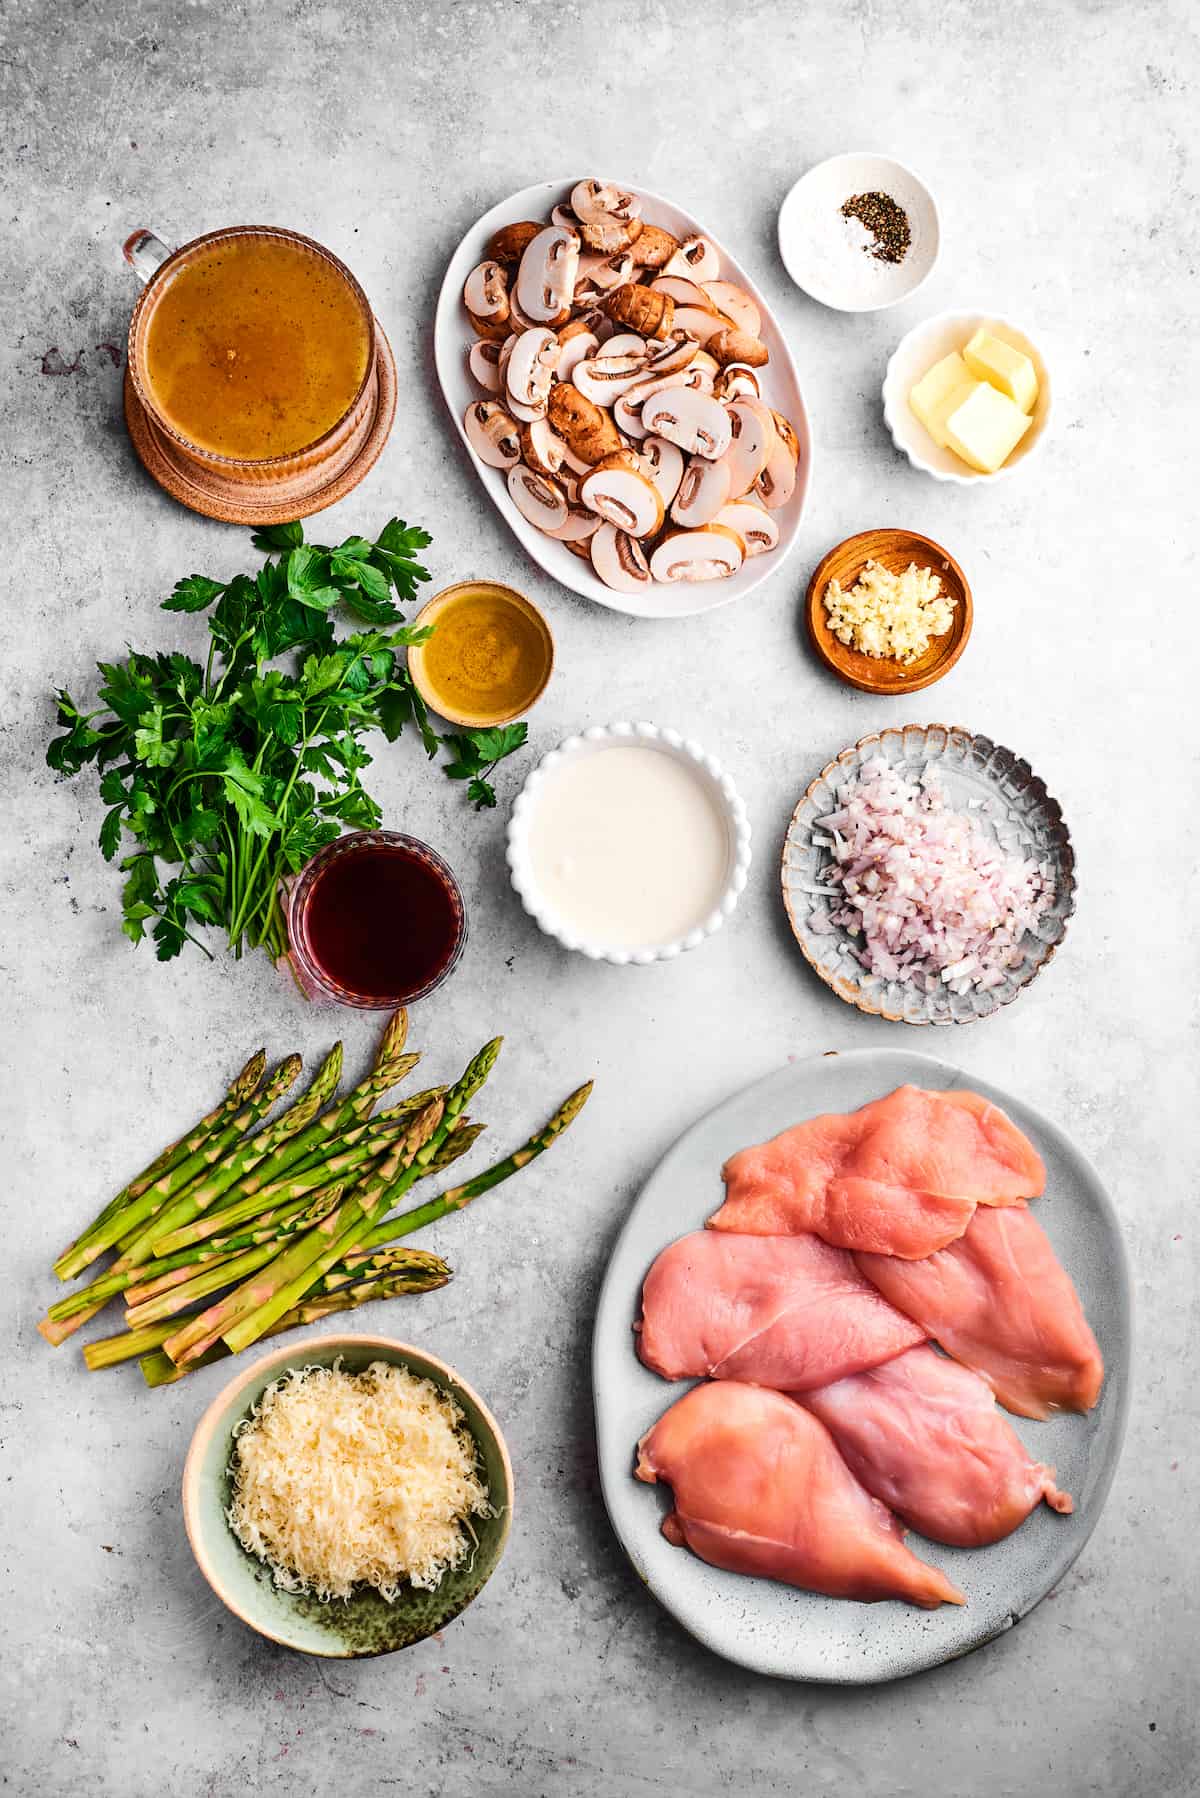 The ingredients for chicken madeira are shown portioned out: chicken, mushrooms, asparagus, parsley, salt and pepper, butter, olive oil, madeira, garlic, mozzarella, cream, broth.